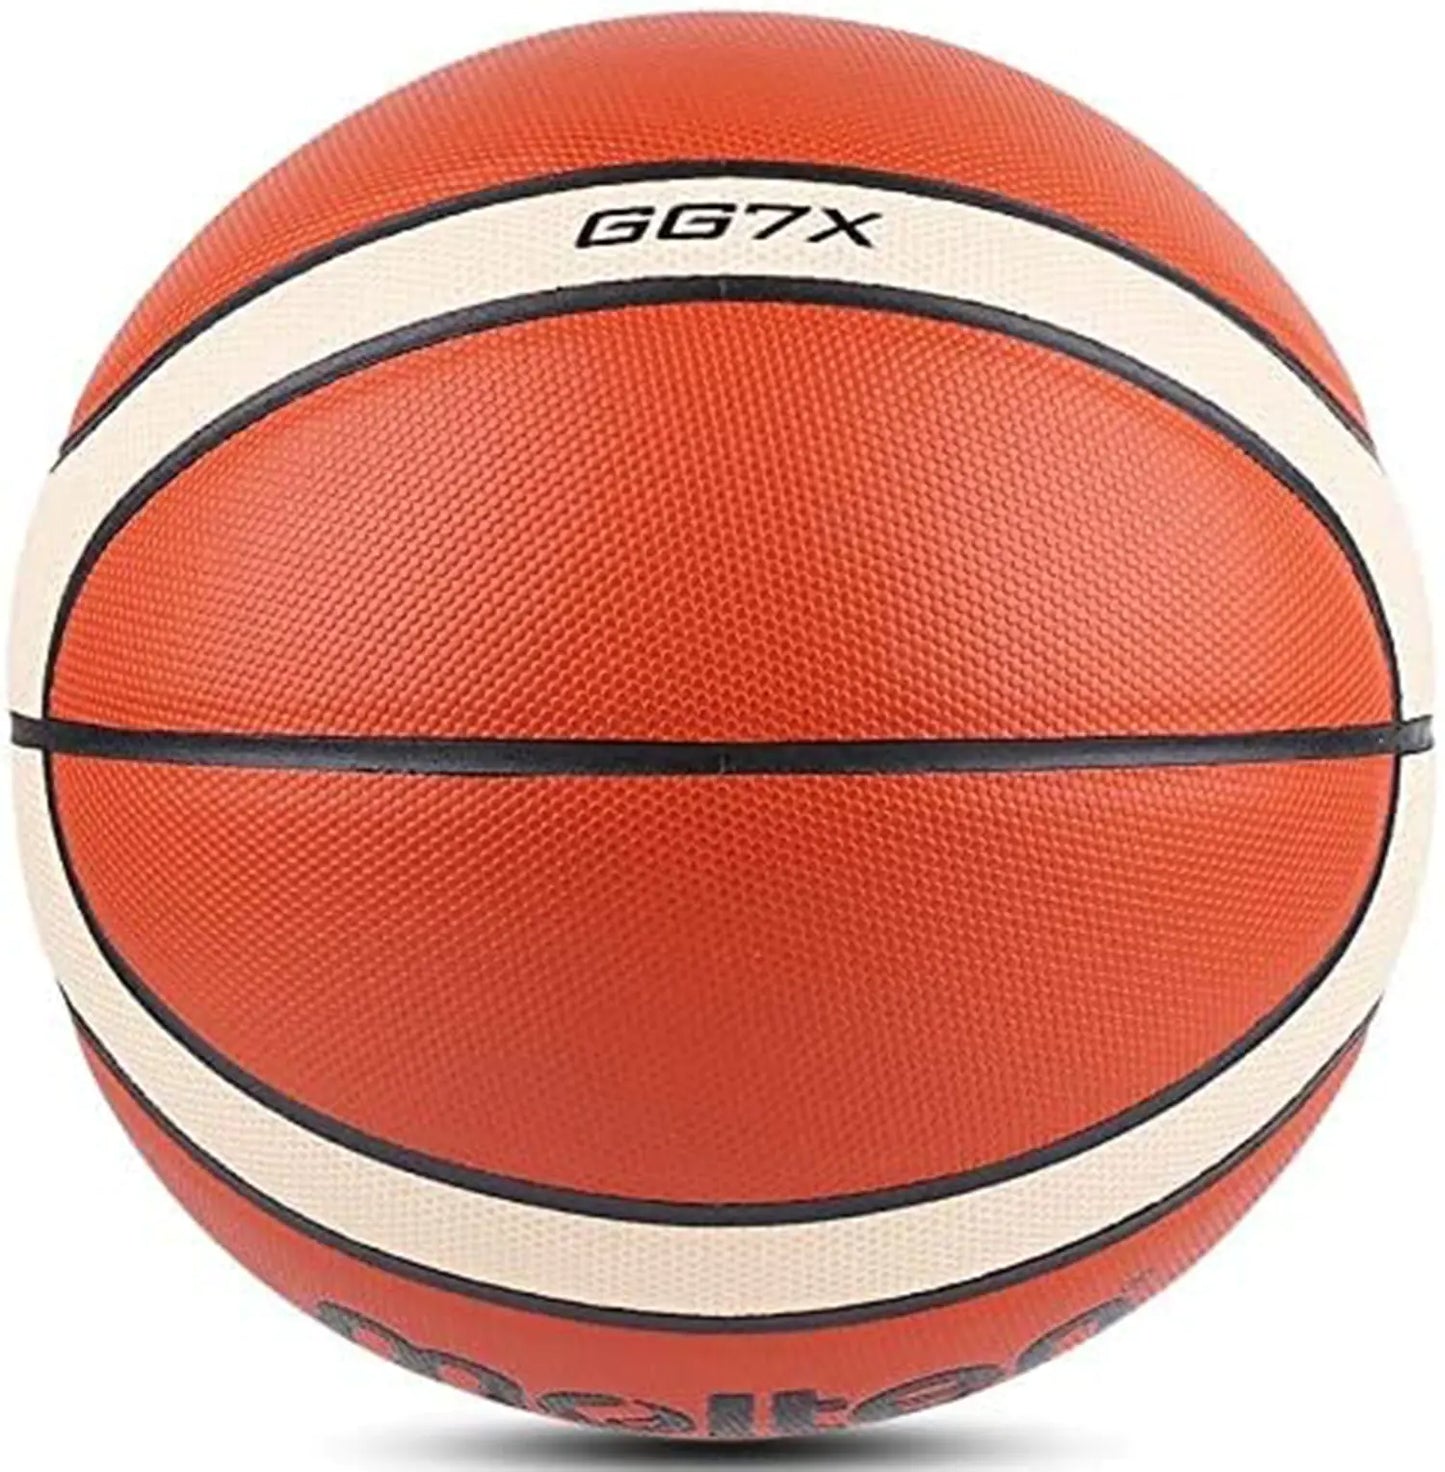 High-Quality Basketball Ball - Official Size 5 - 7